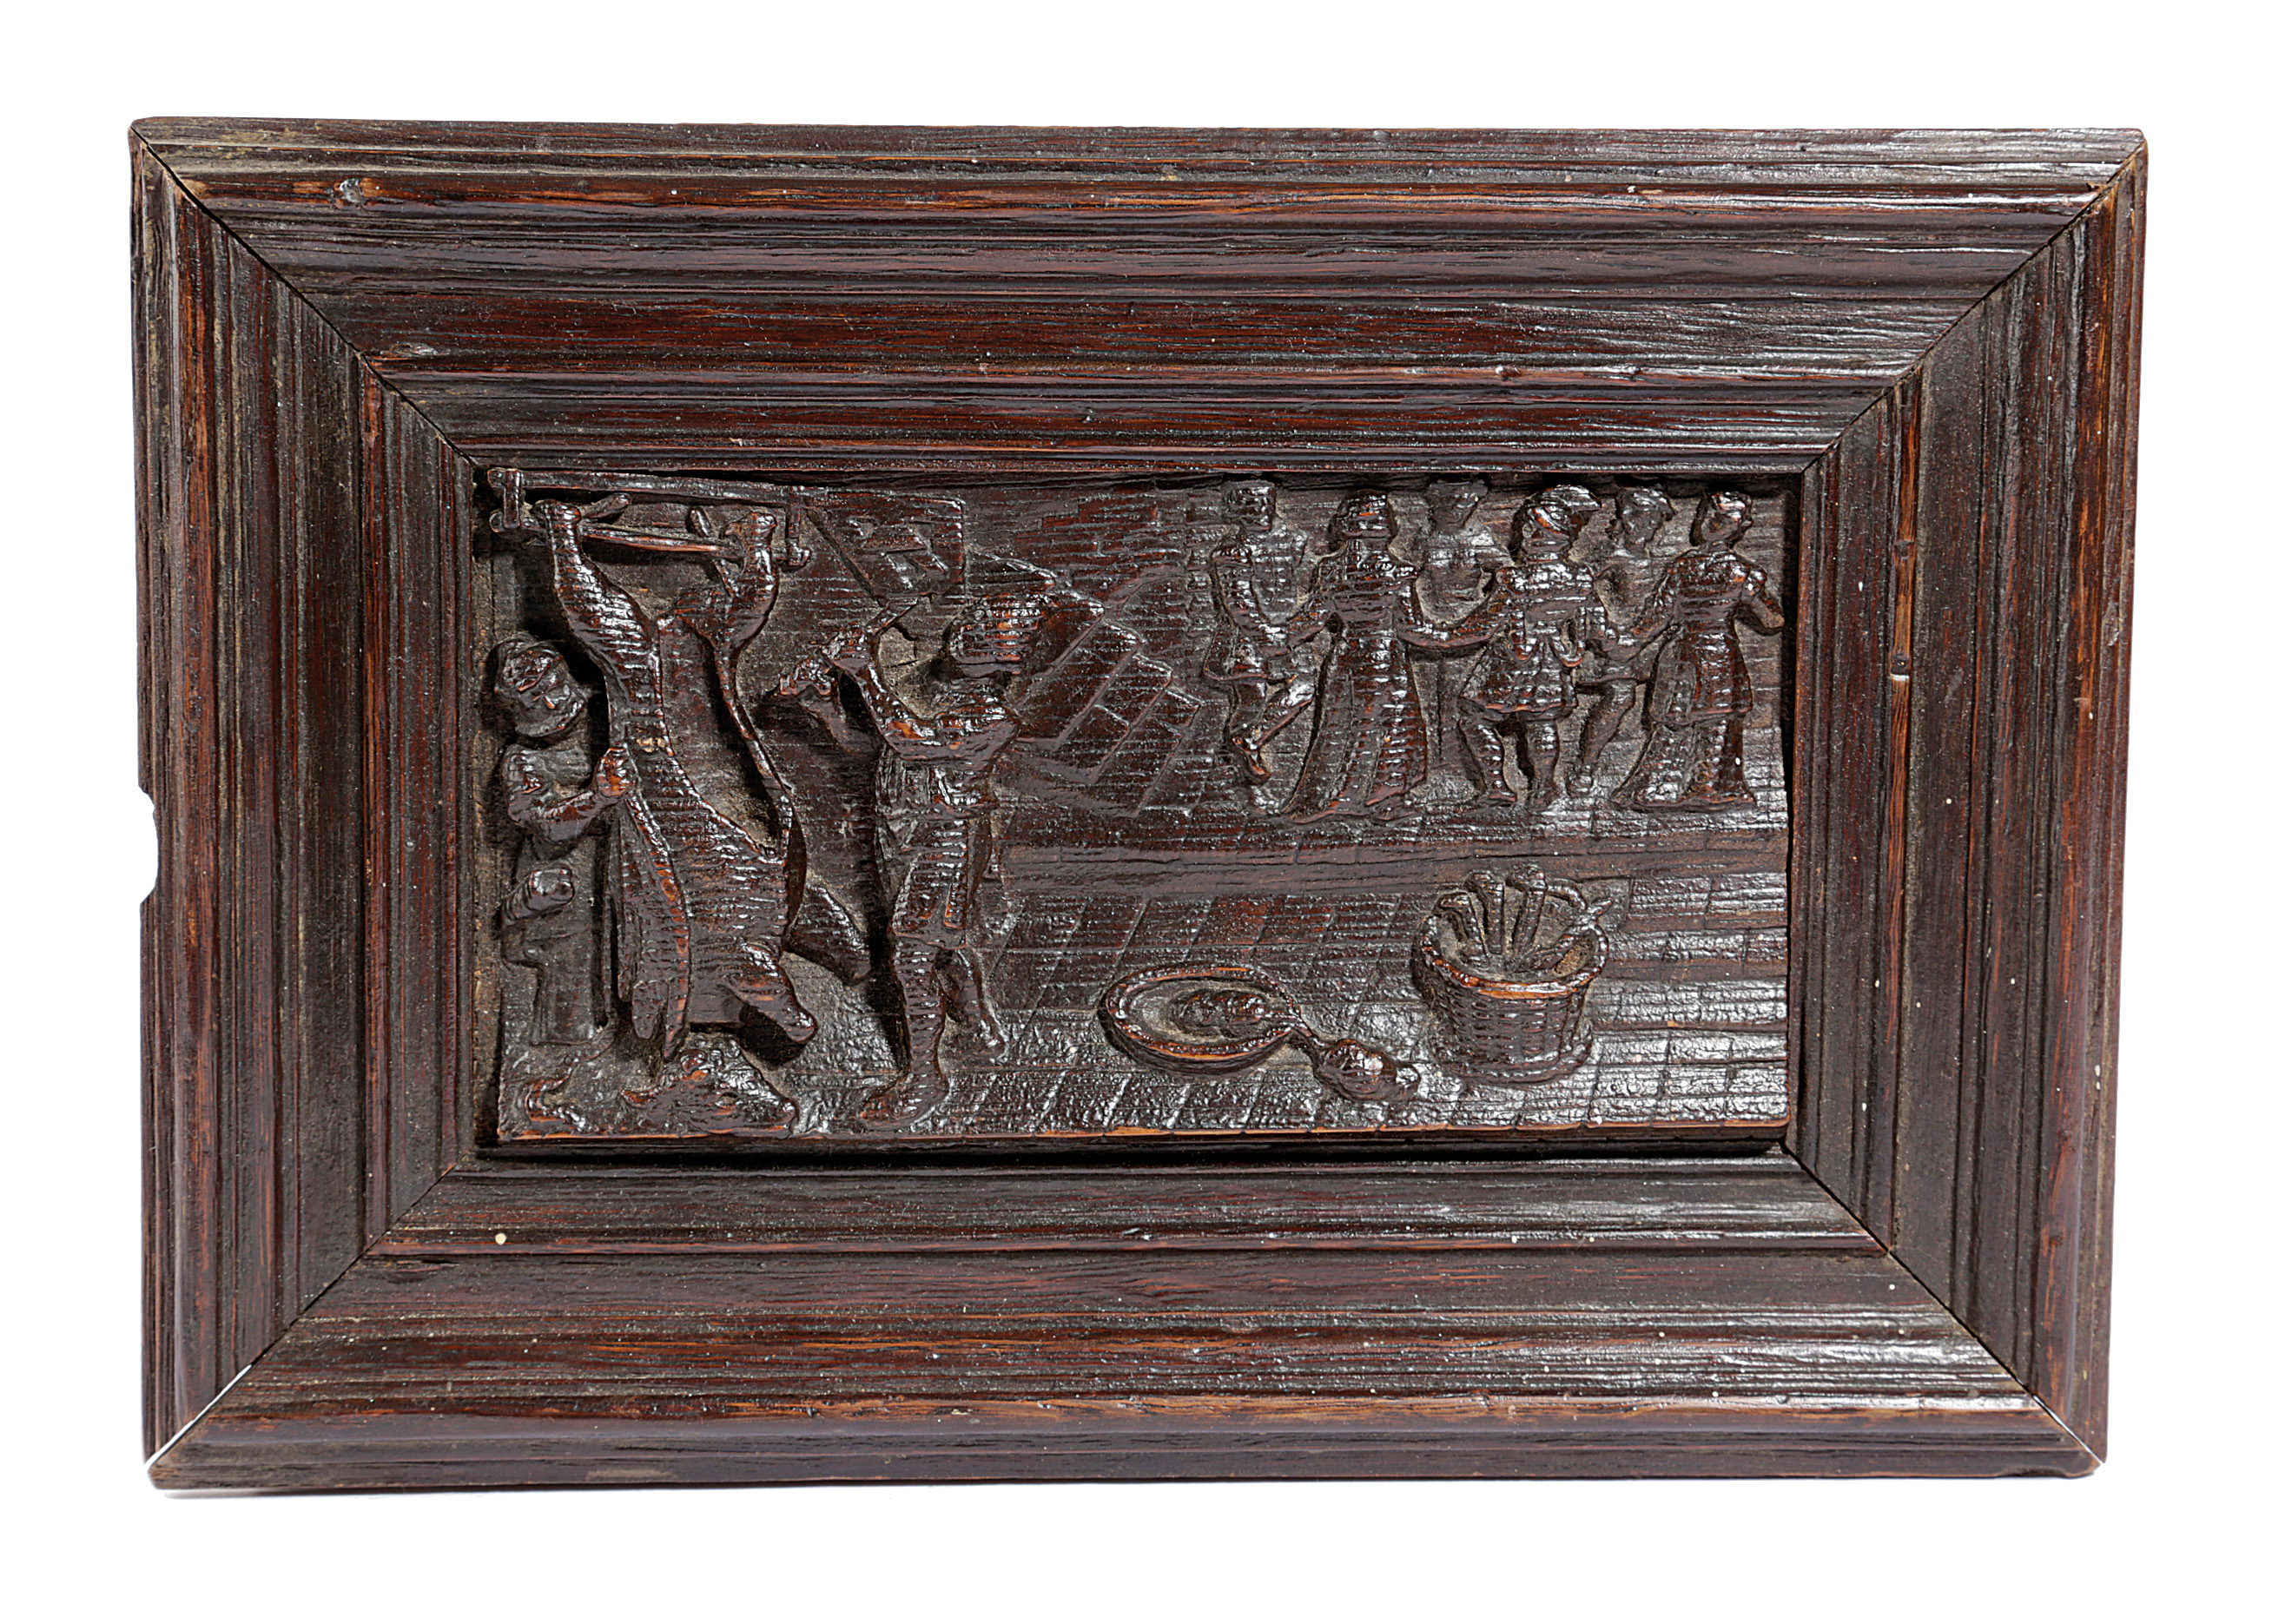 A DUTCH OAK PANEL 17TH CENTURY relief carved with two men butchering a cow, with a basket of